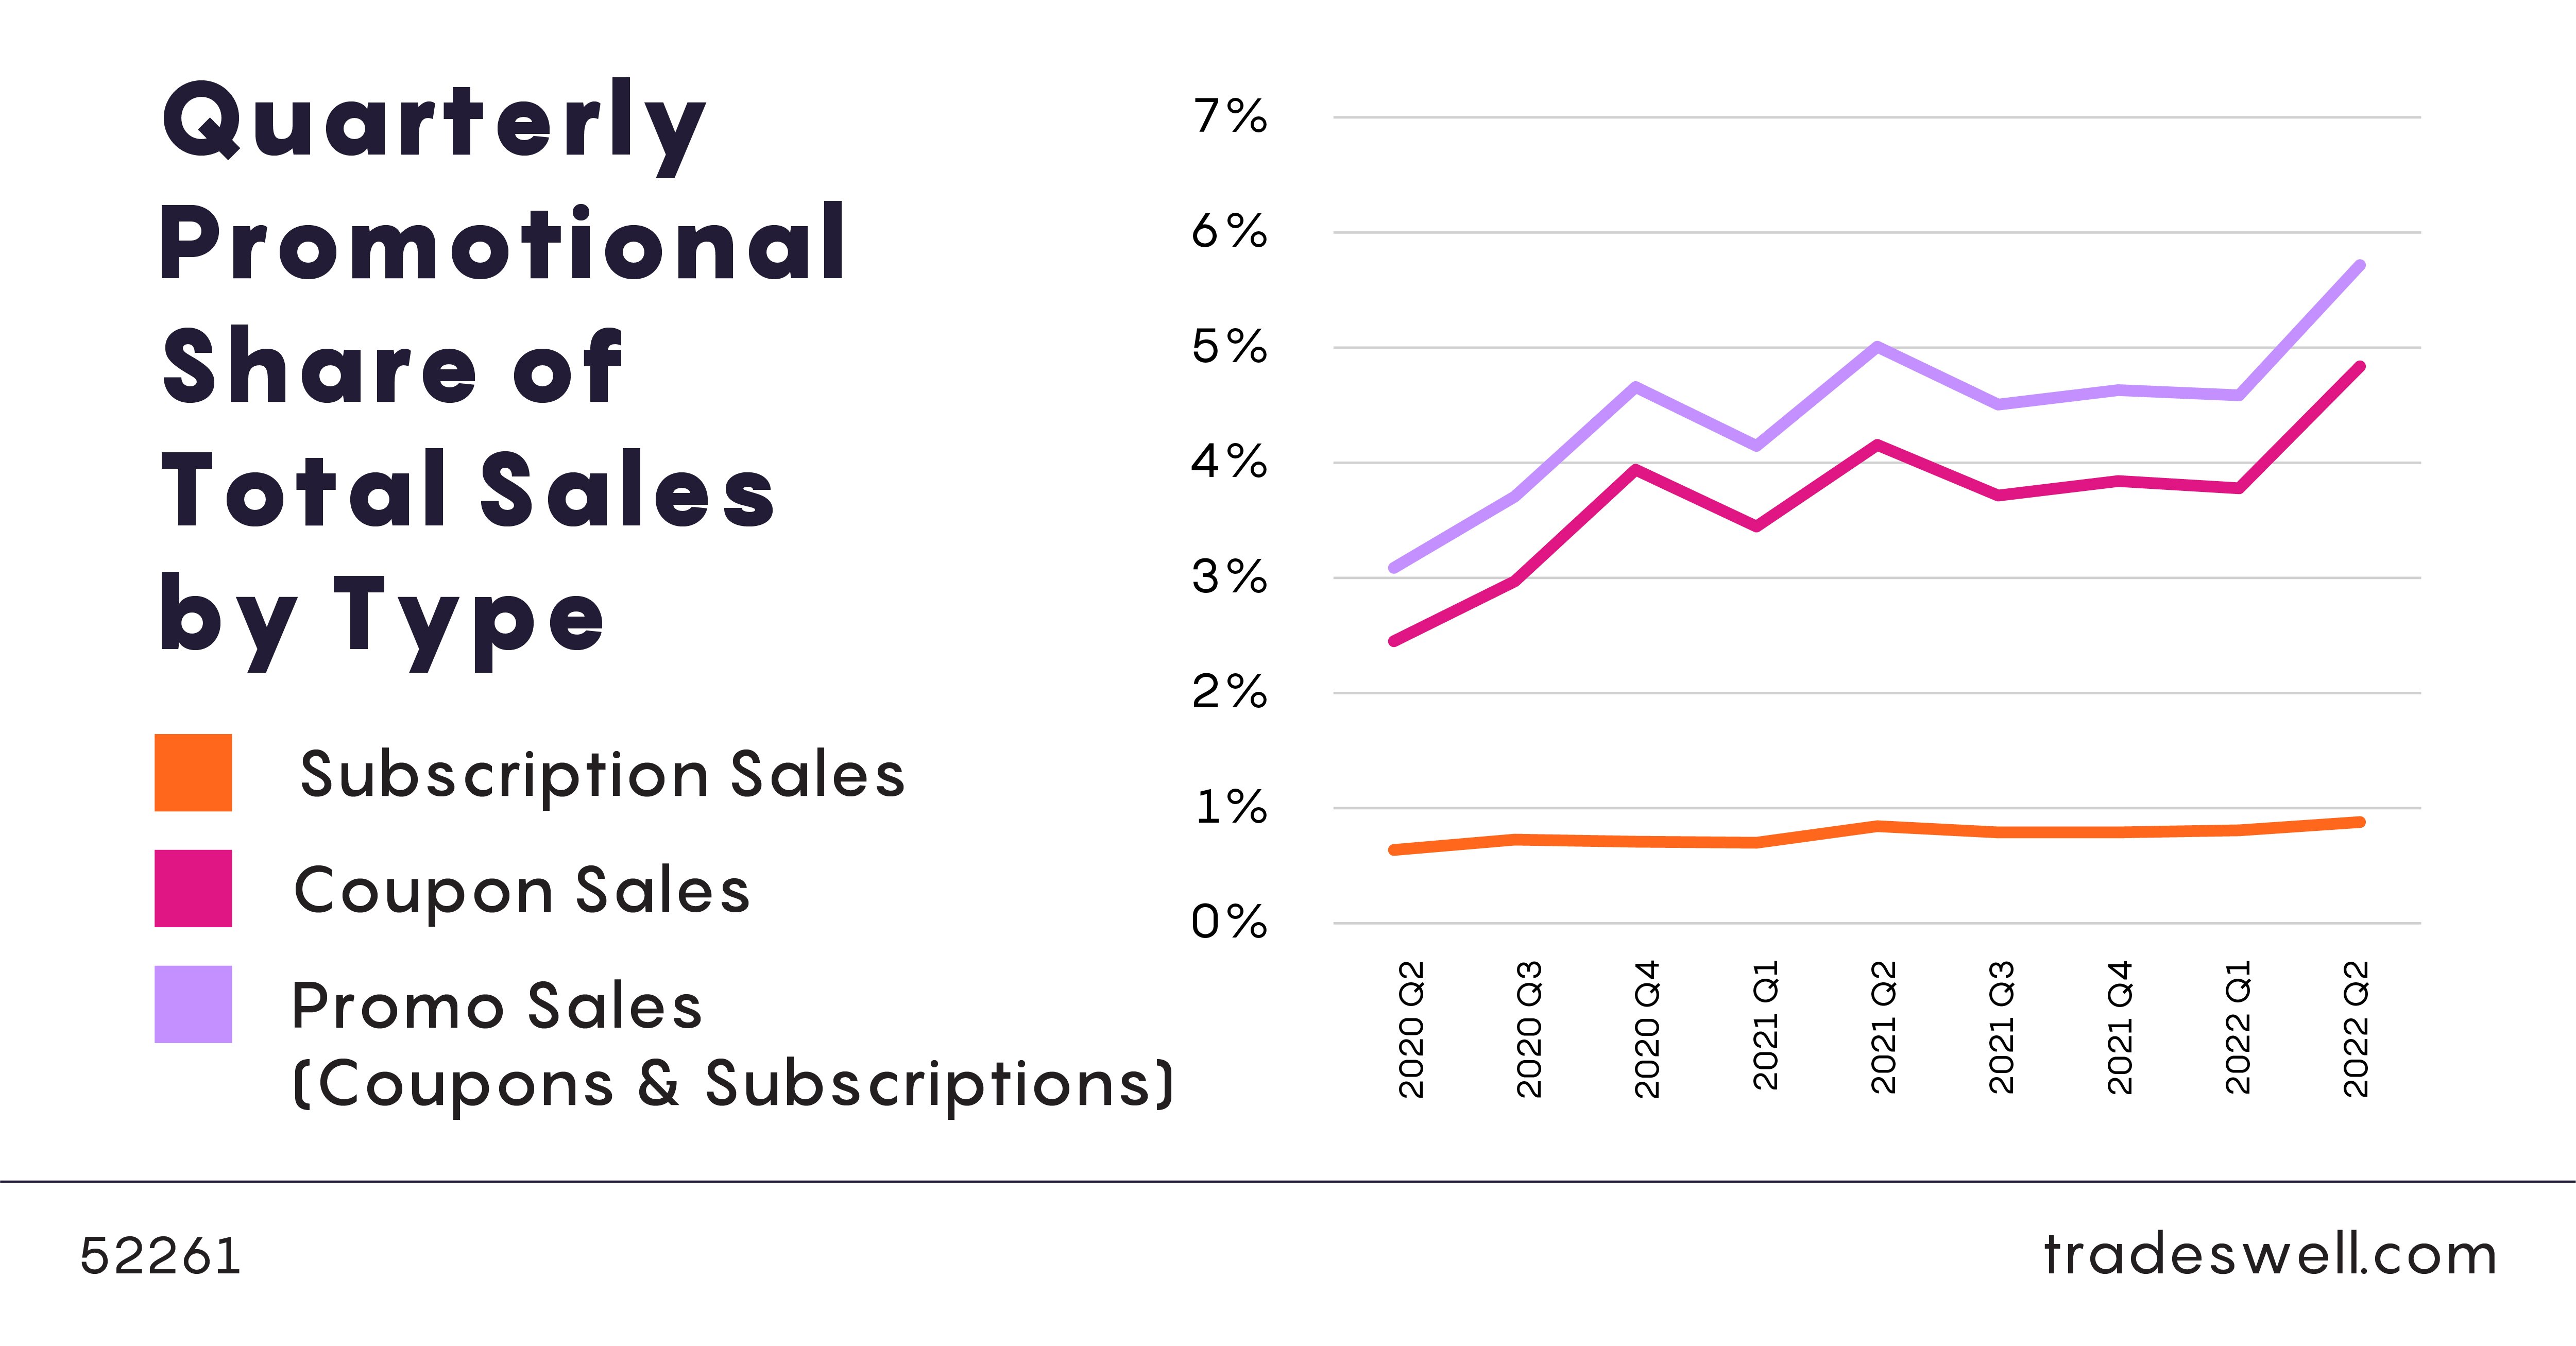 Amazon quarterly promotional share of total sales by type